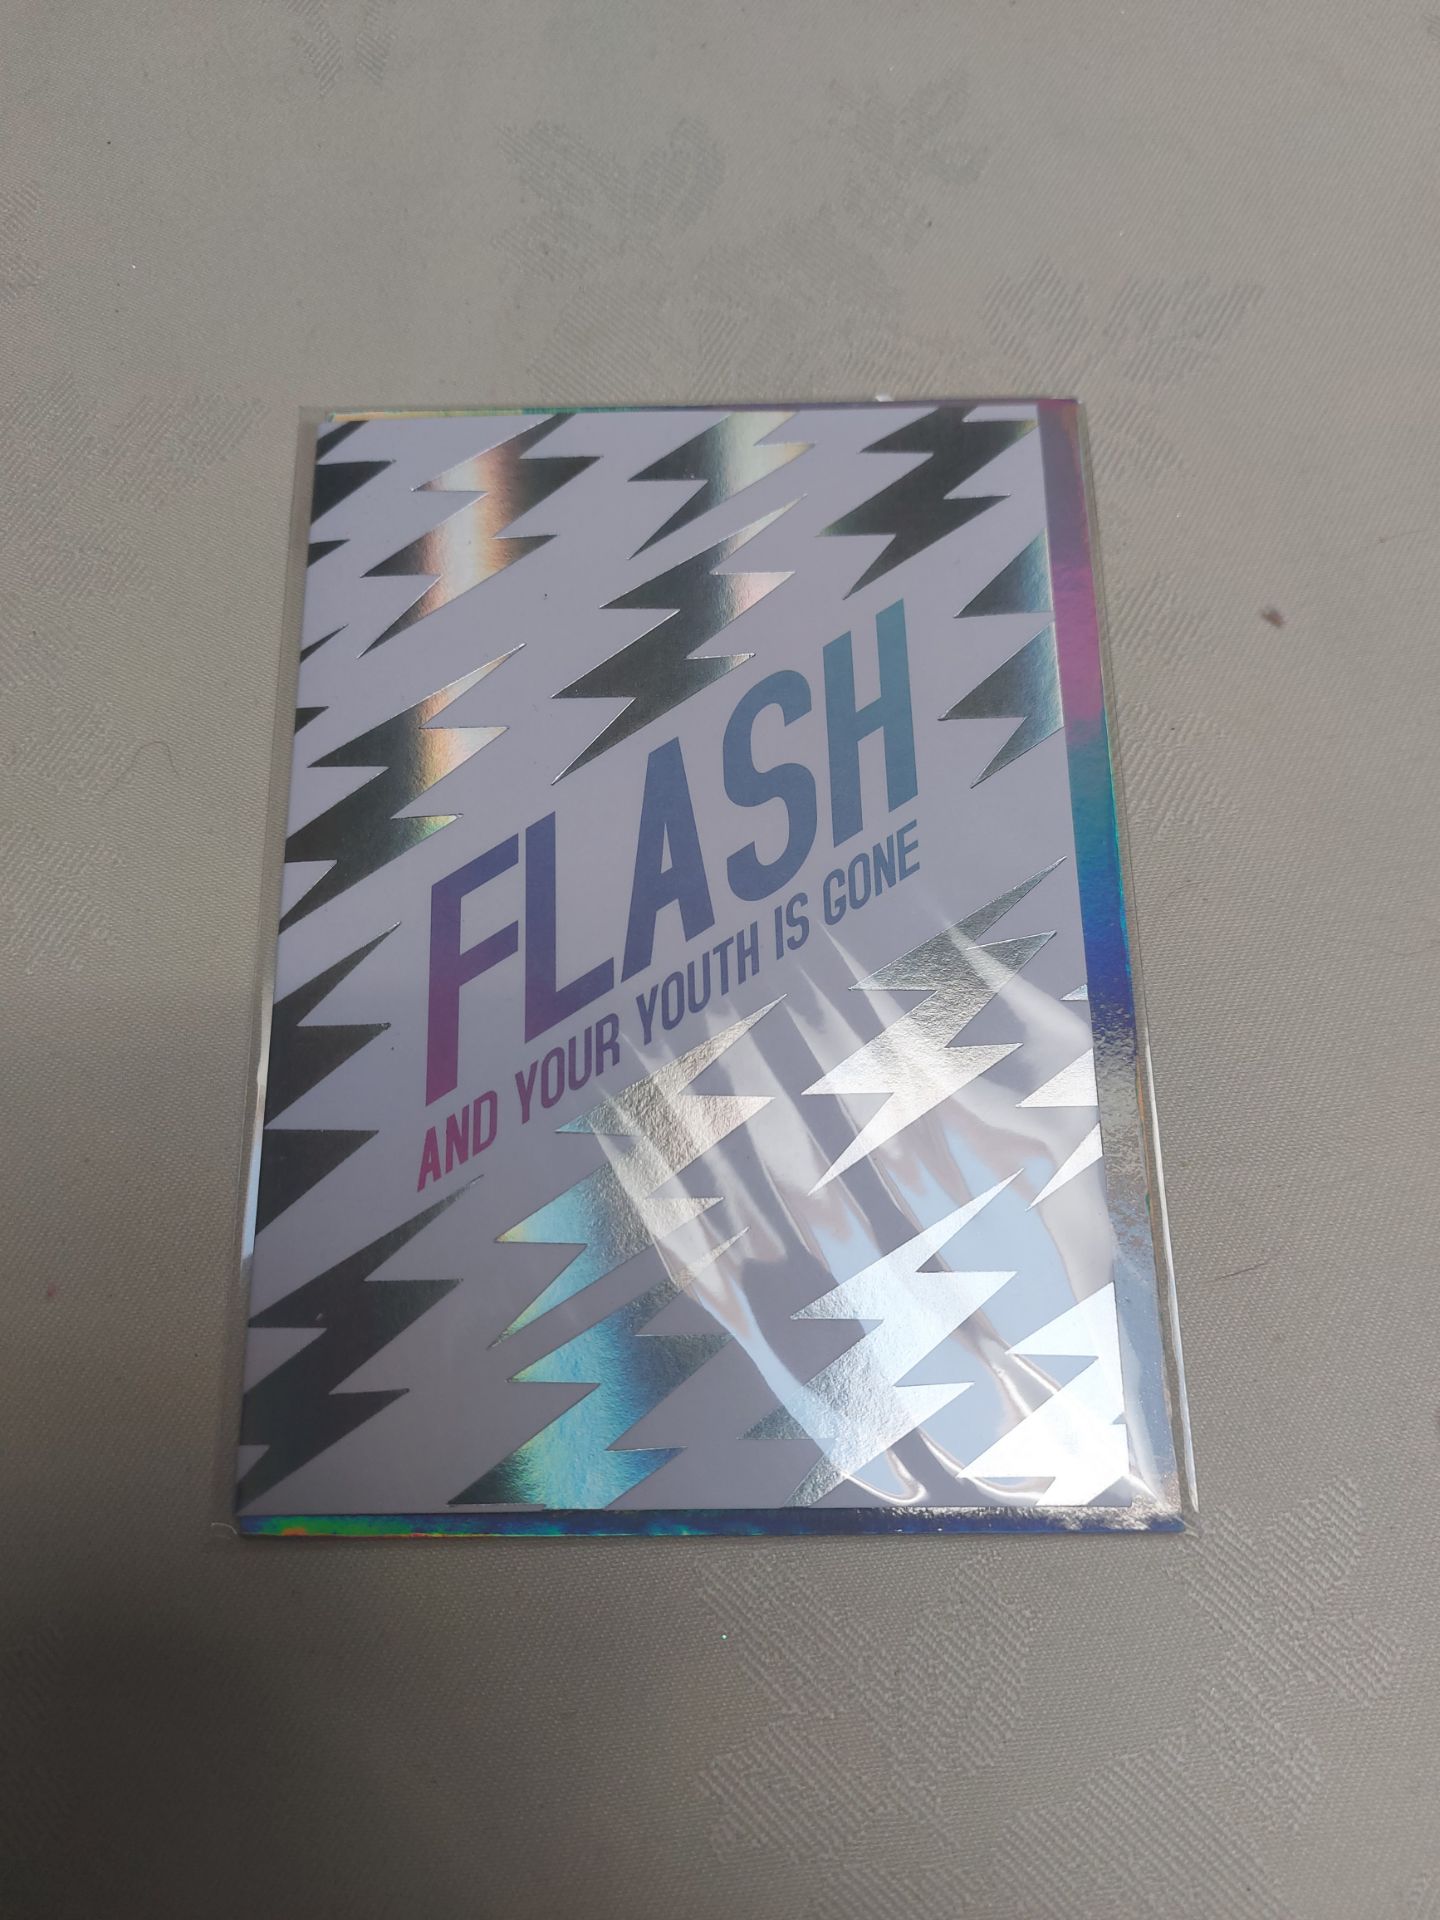 Greetings Cards. Flash and Your Youth Is Gone. RRP £120 - Image 2 of 3